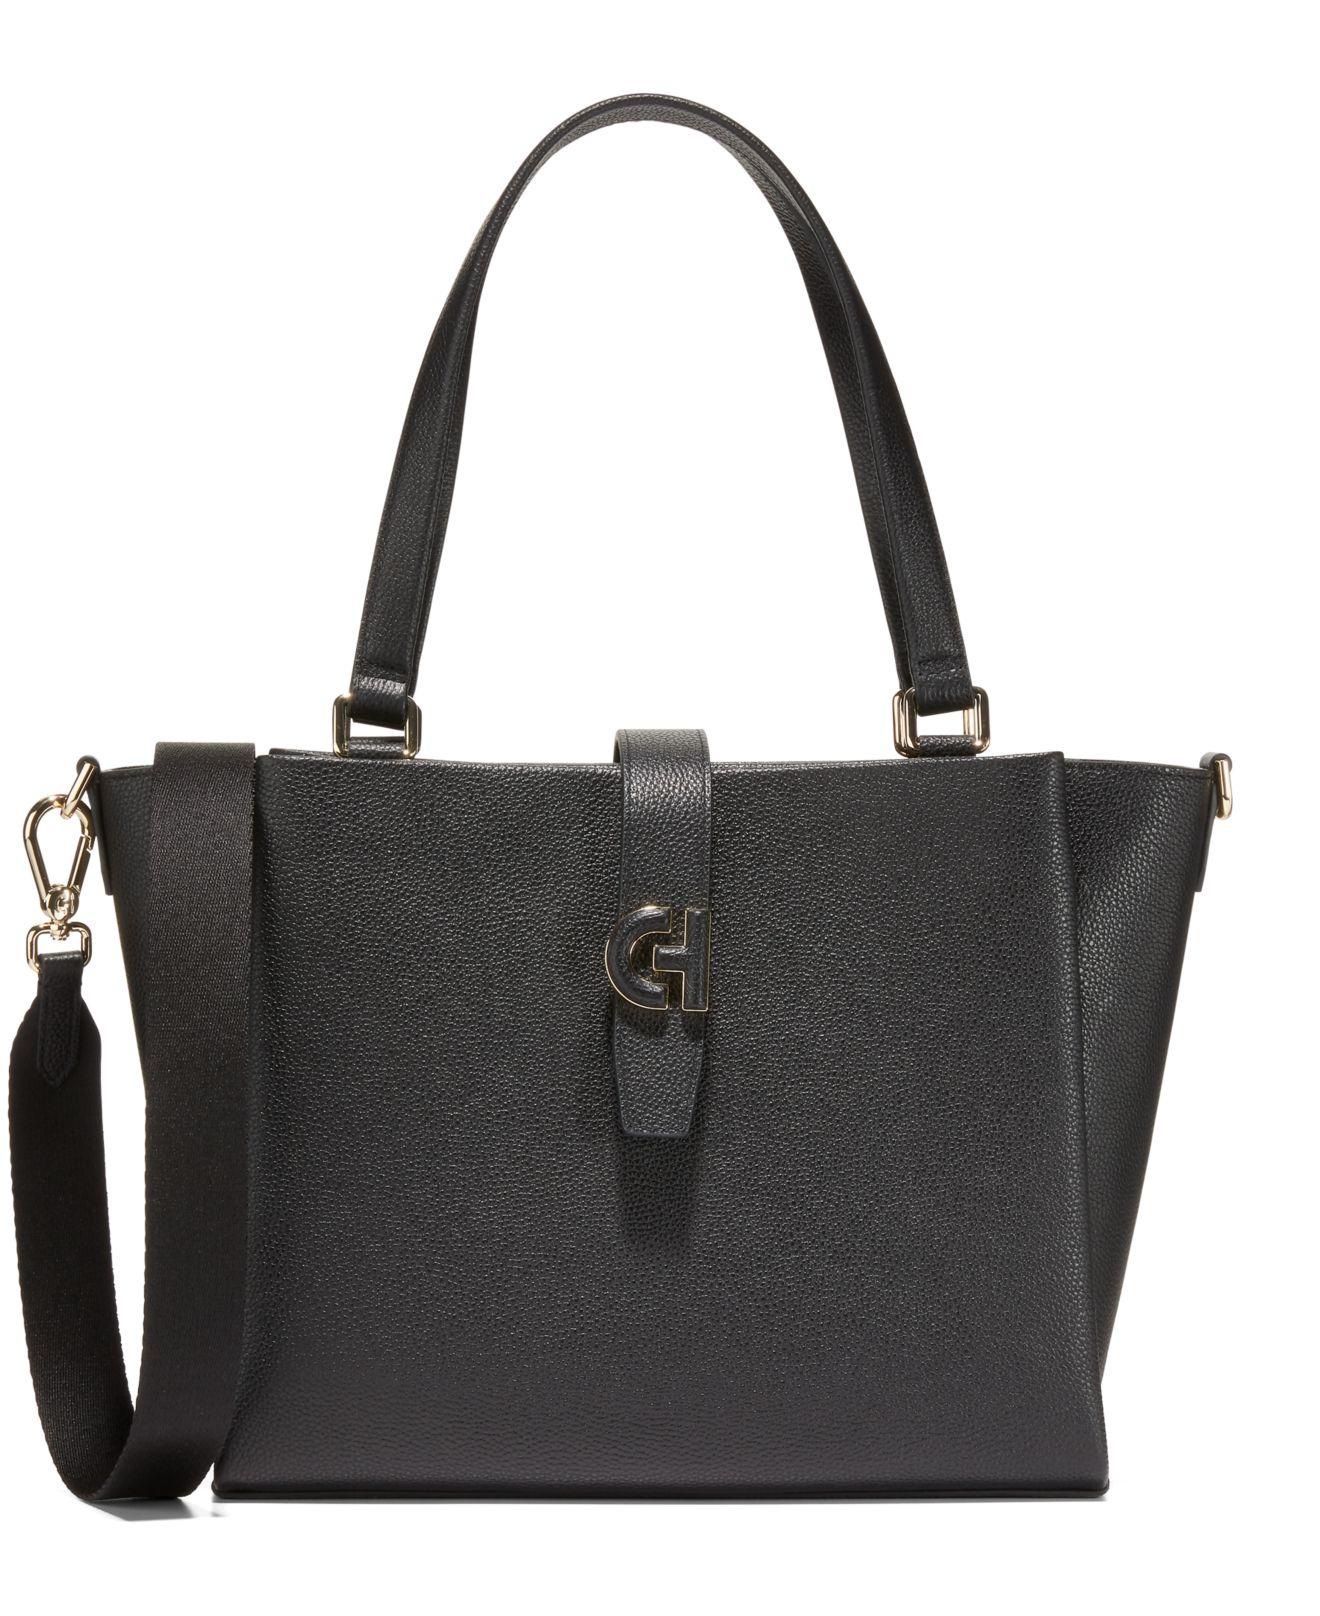 Cole Haan Essential Carryall Leather Tote in Black | Lyst